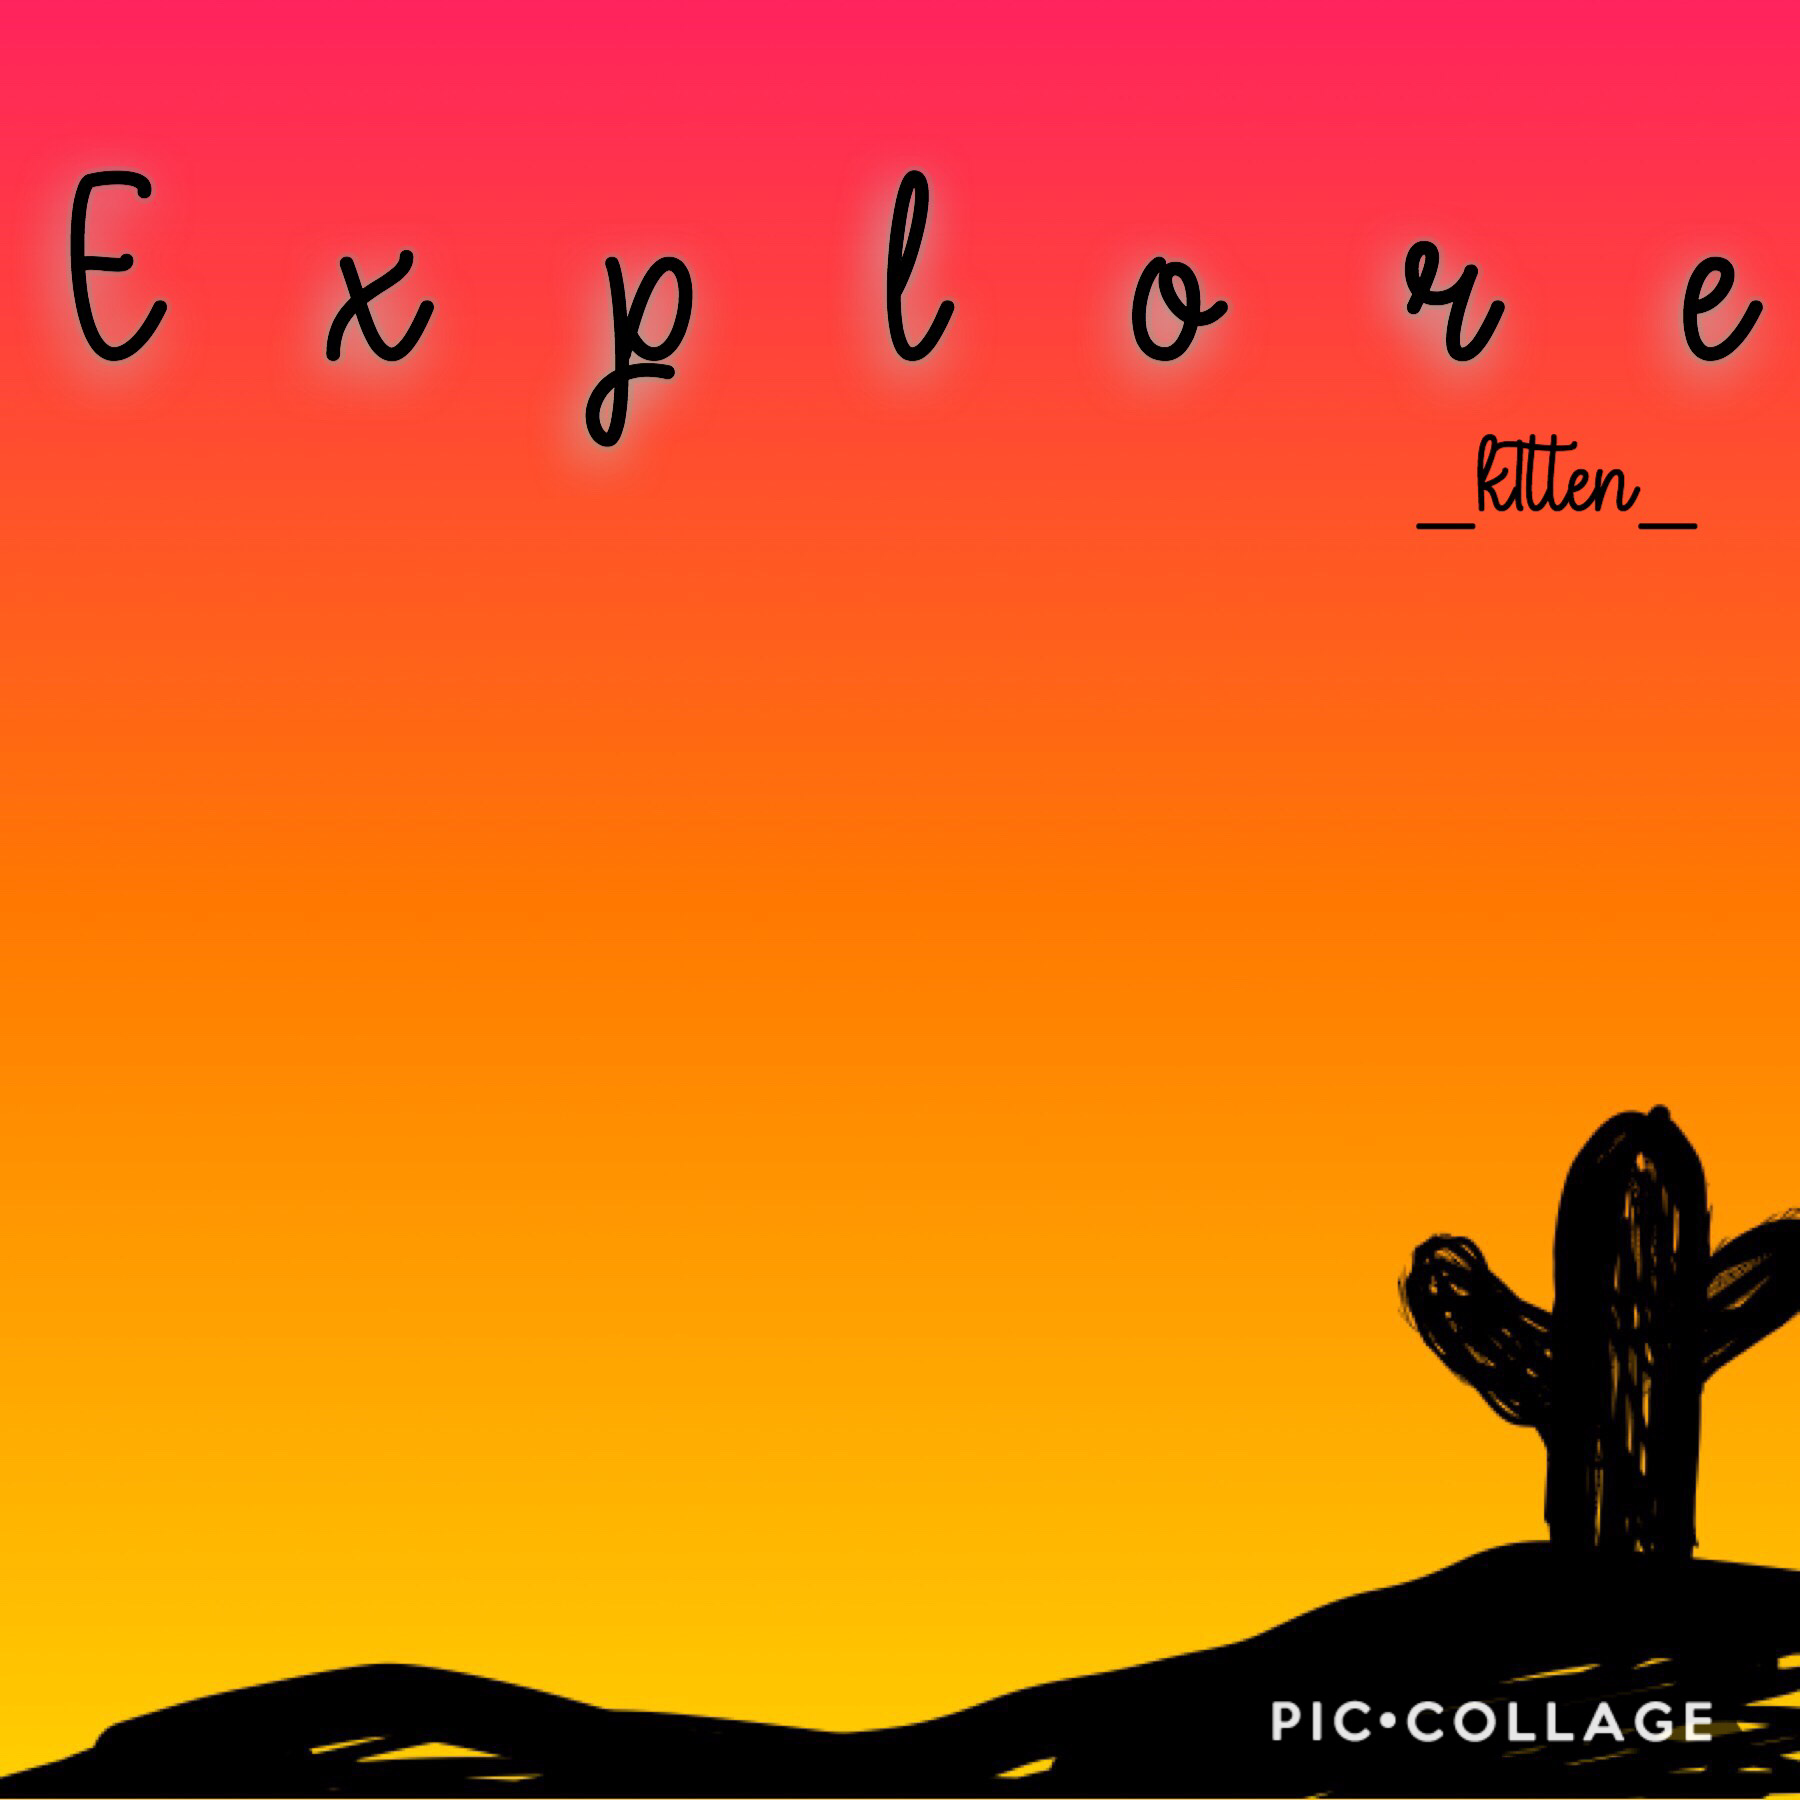 Tap

Here’s a rlly quick one cos I was bored on the bus earlier 

Ik this isn’t the best but I thought I’d post it anyway cos I made this background on Phonto and it looked like a sunset so here ya go! (I drew the cactus)

15/6/18